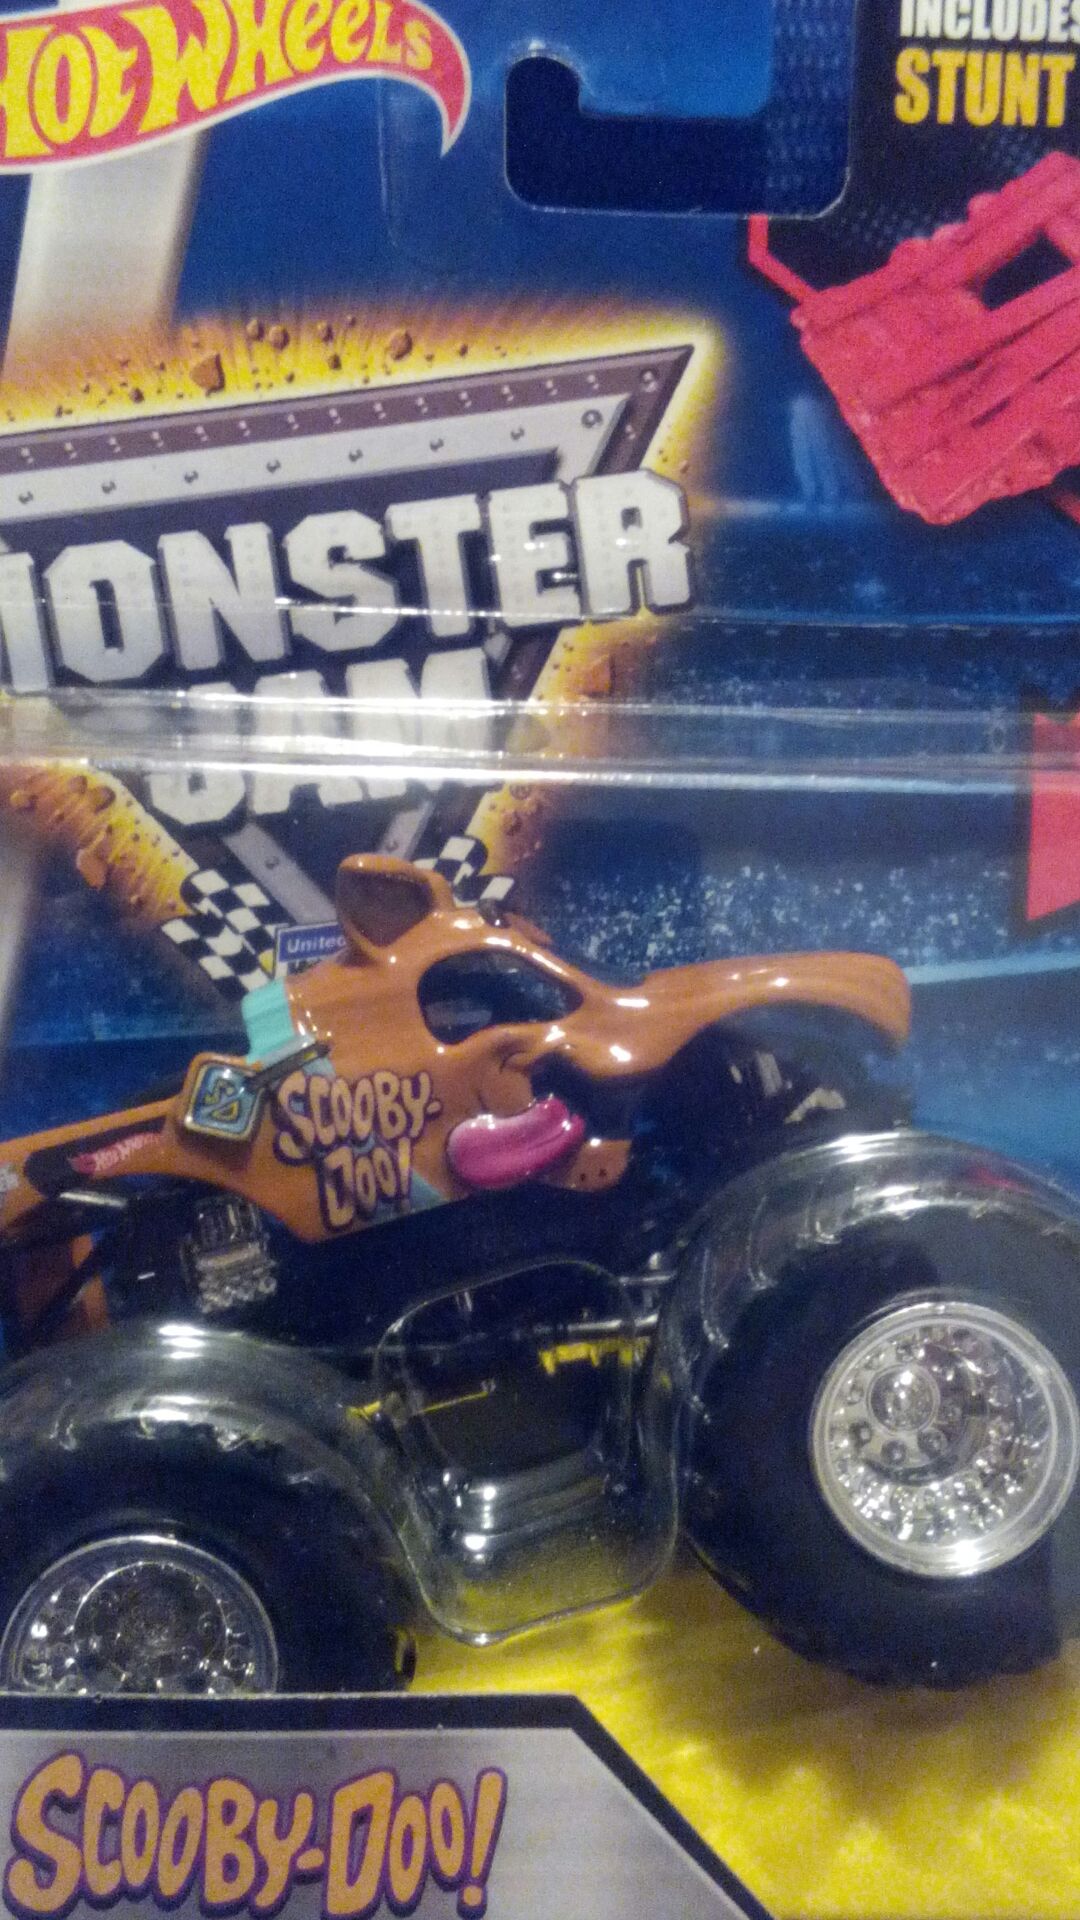 monster jam Scooby- Doo - 2016 Monster Jam toy car collectible - Main Image 1